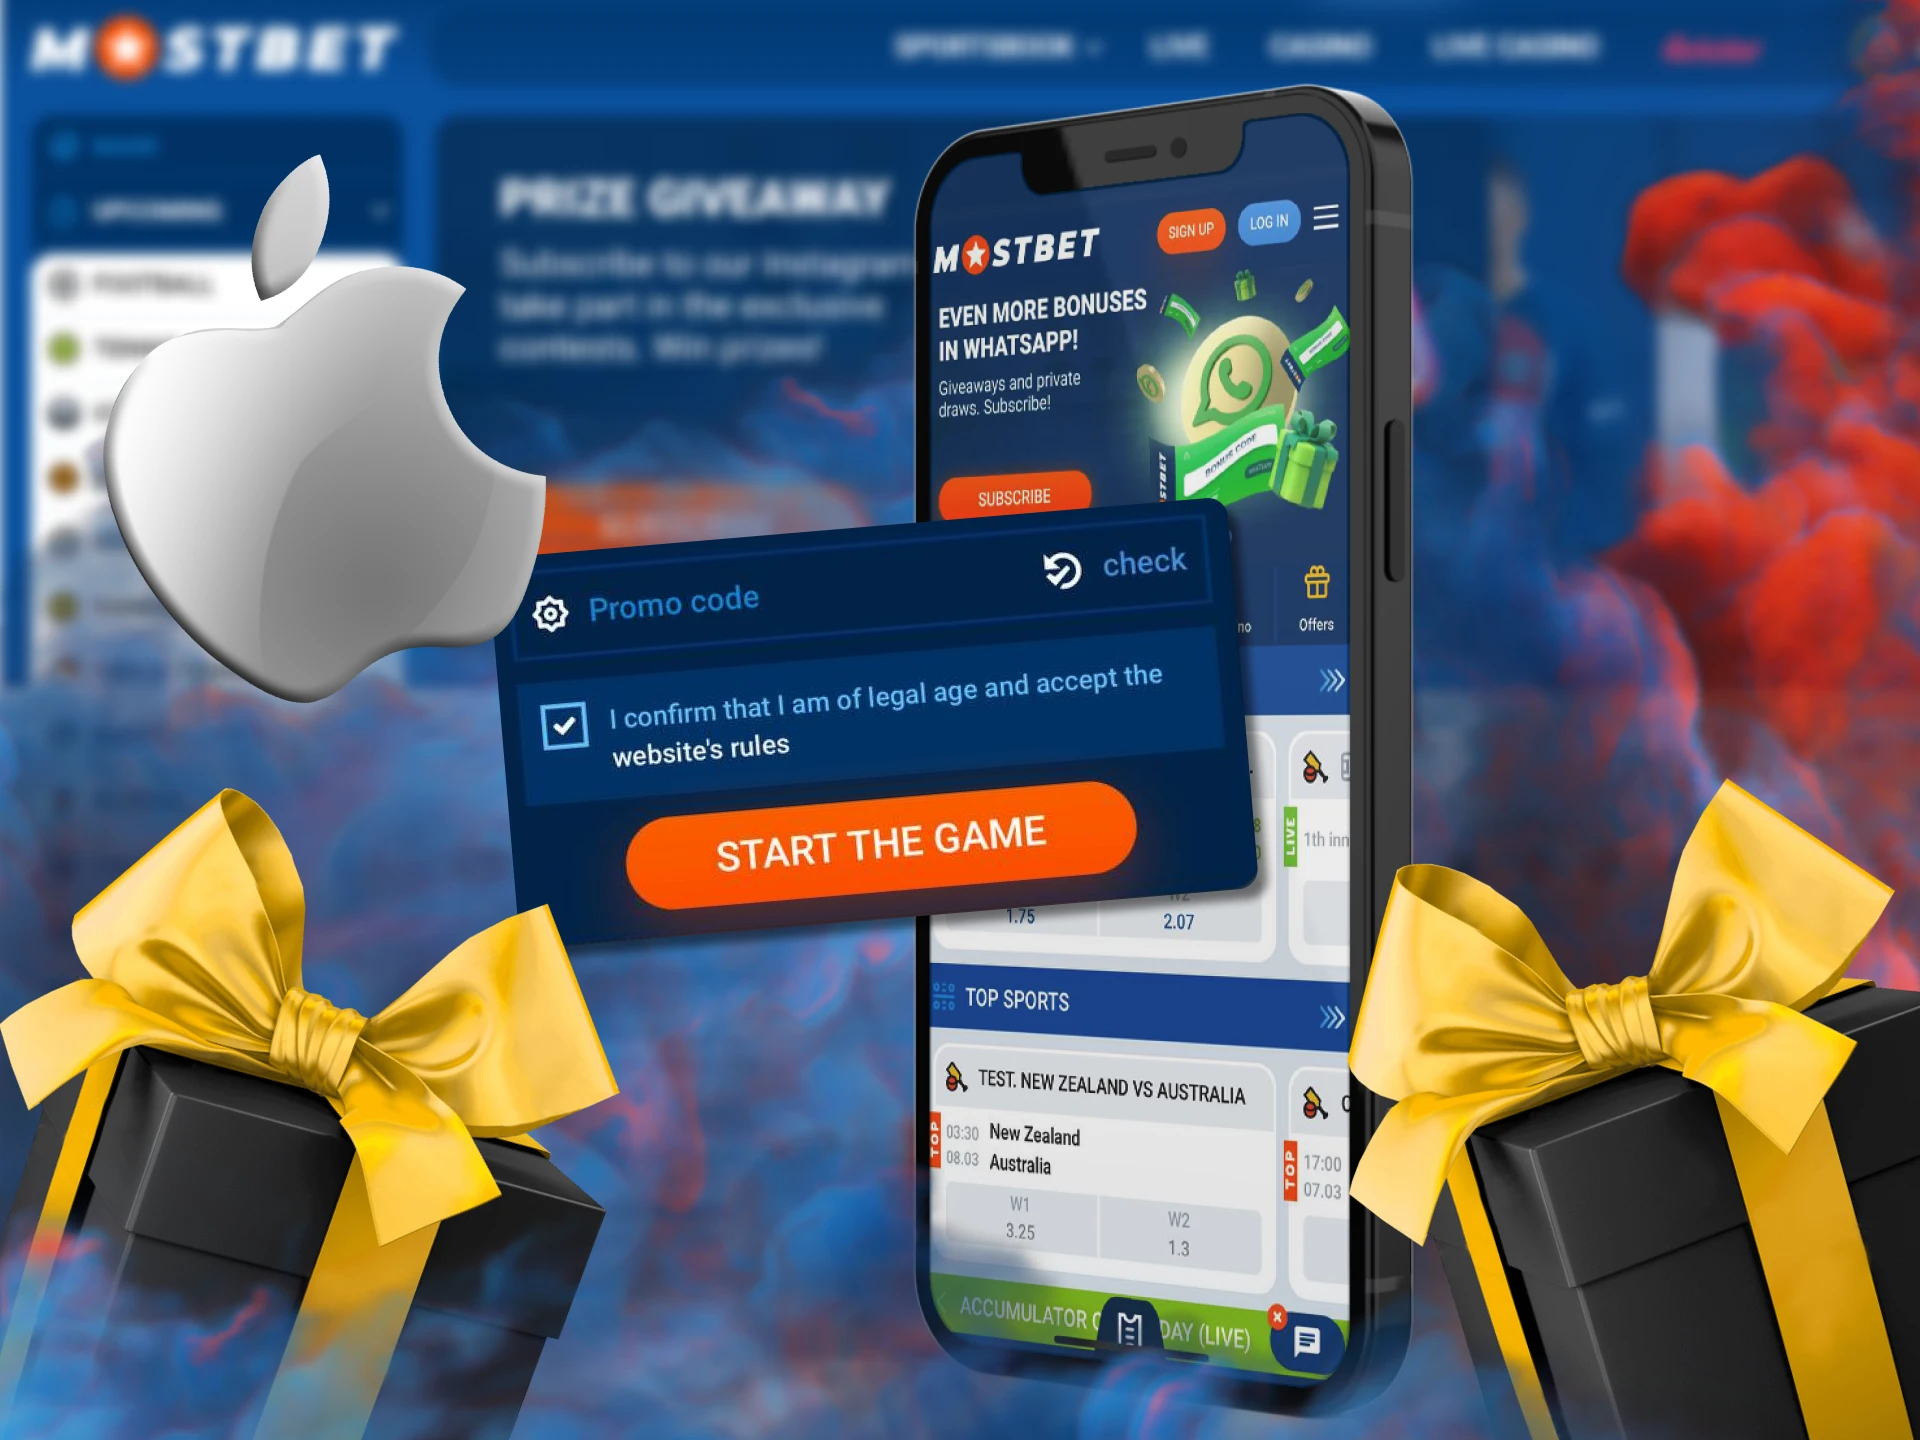 Get in-app bonus from Mostbet promo code and make bets on your iOS phone.